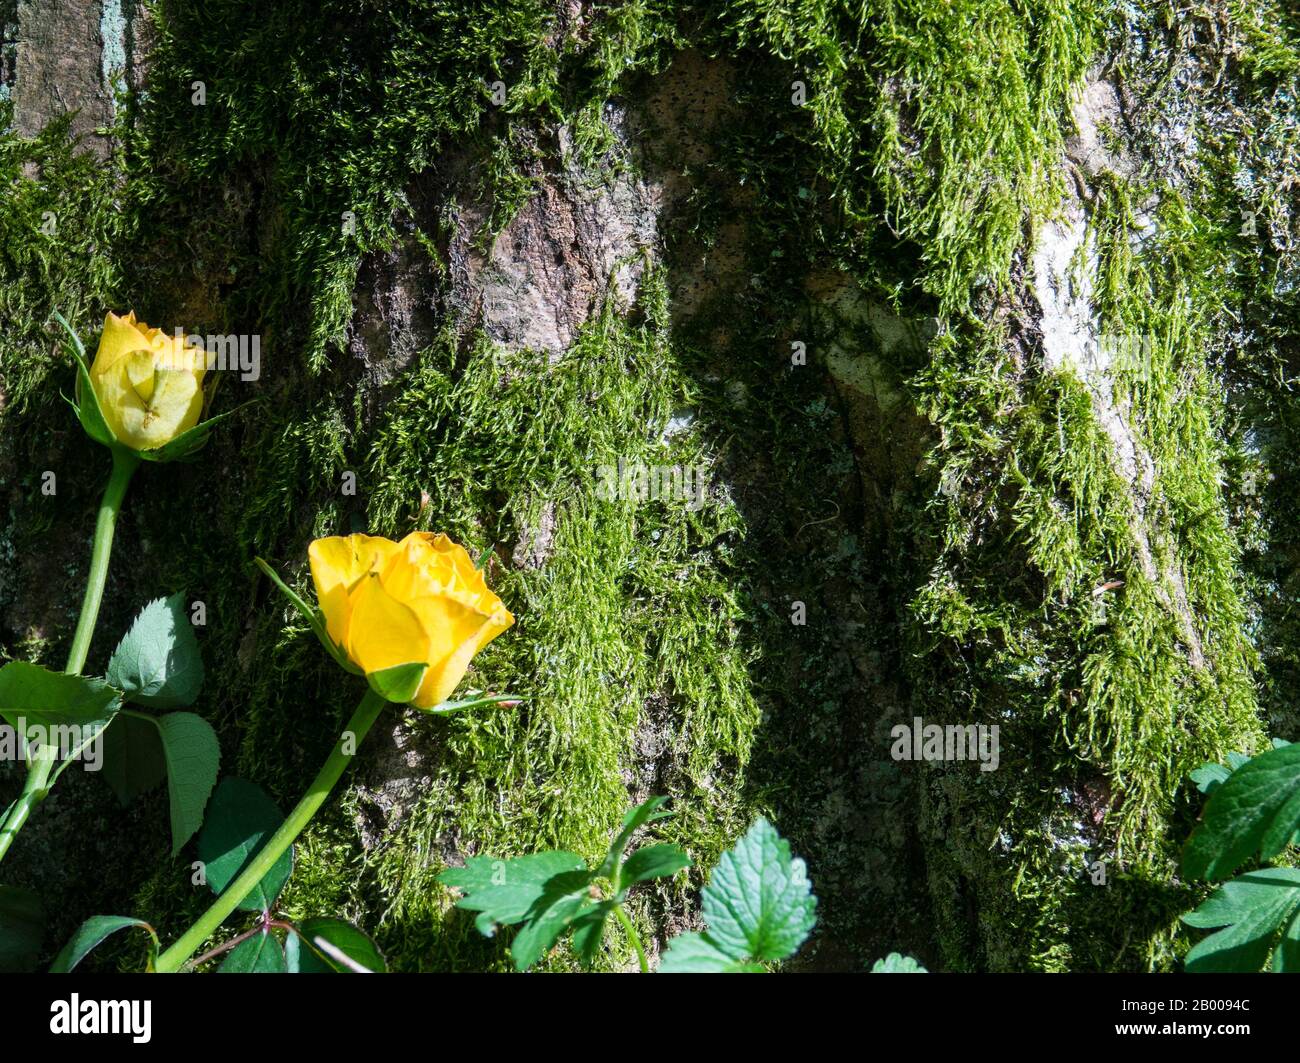 Yellow roses lies at the tree trunk in a forest Cemetery, Germany Stock Photo